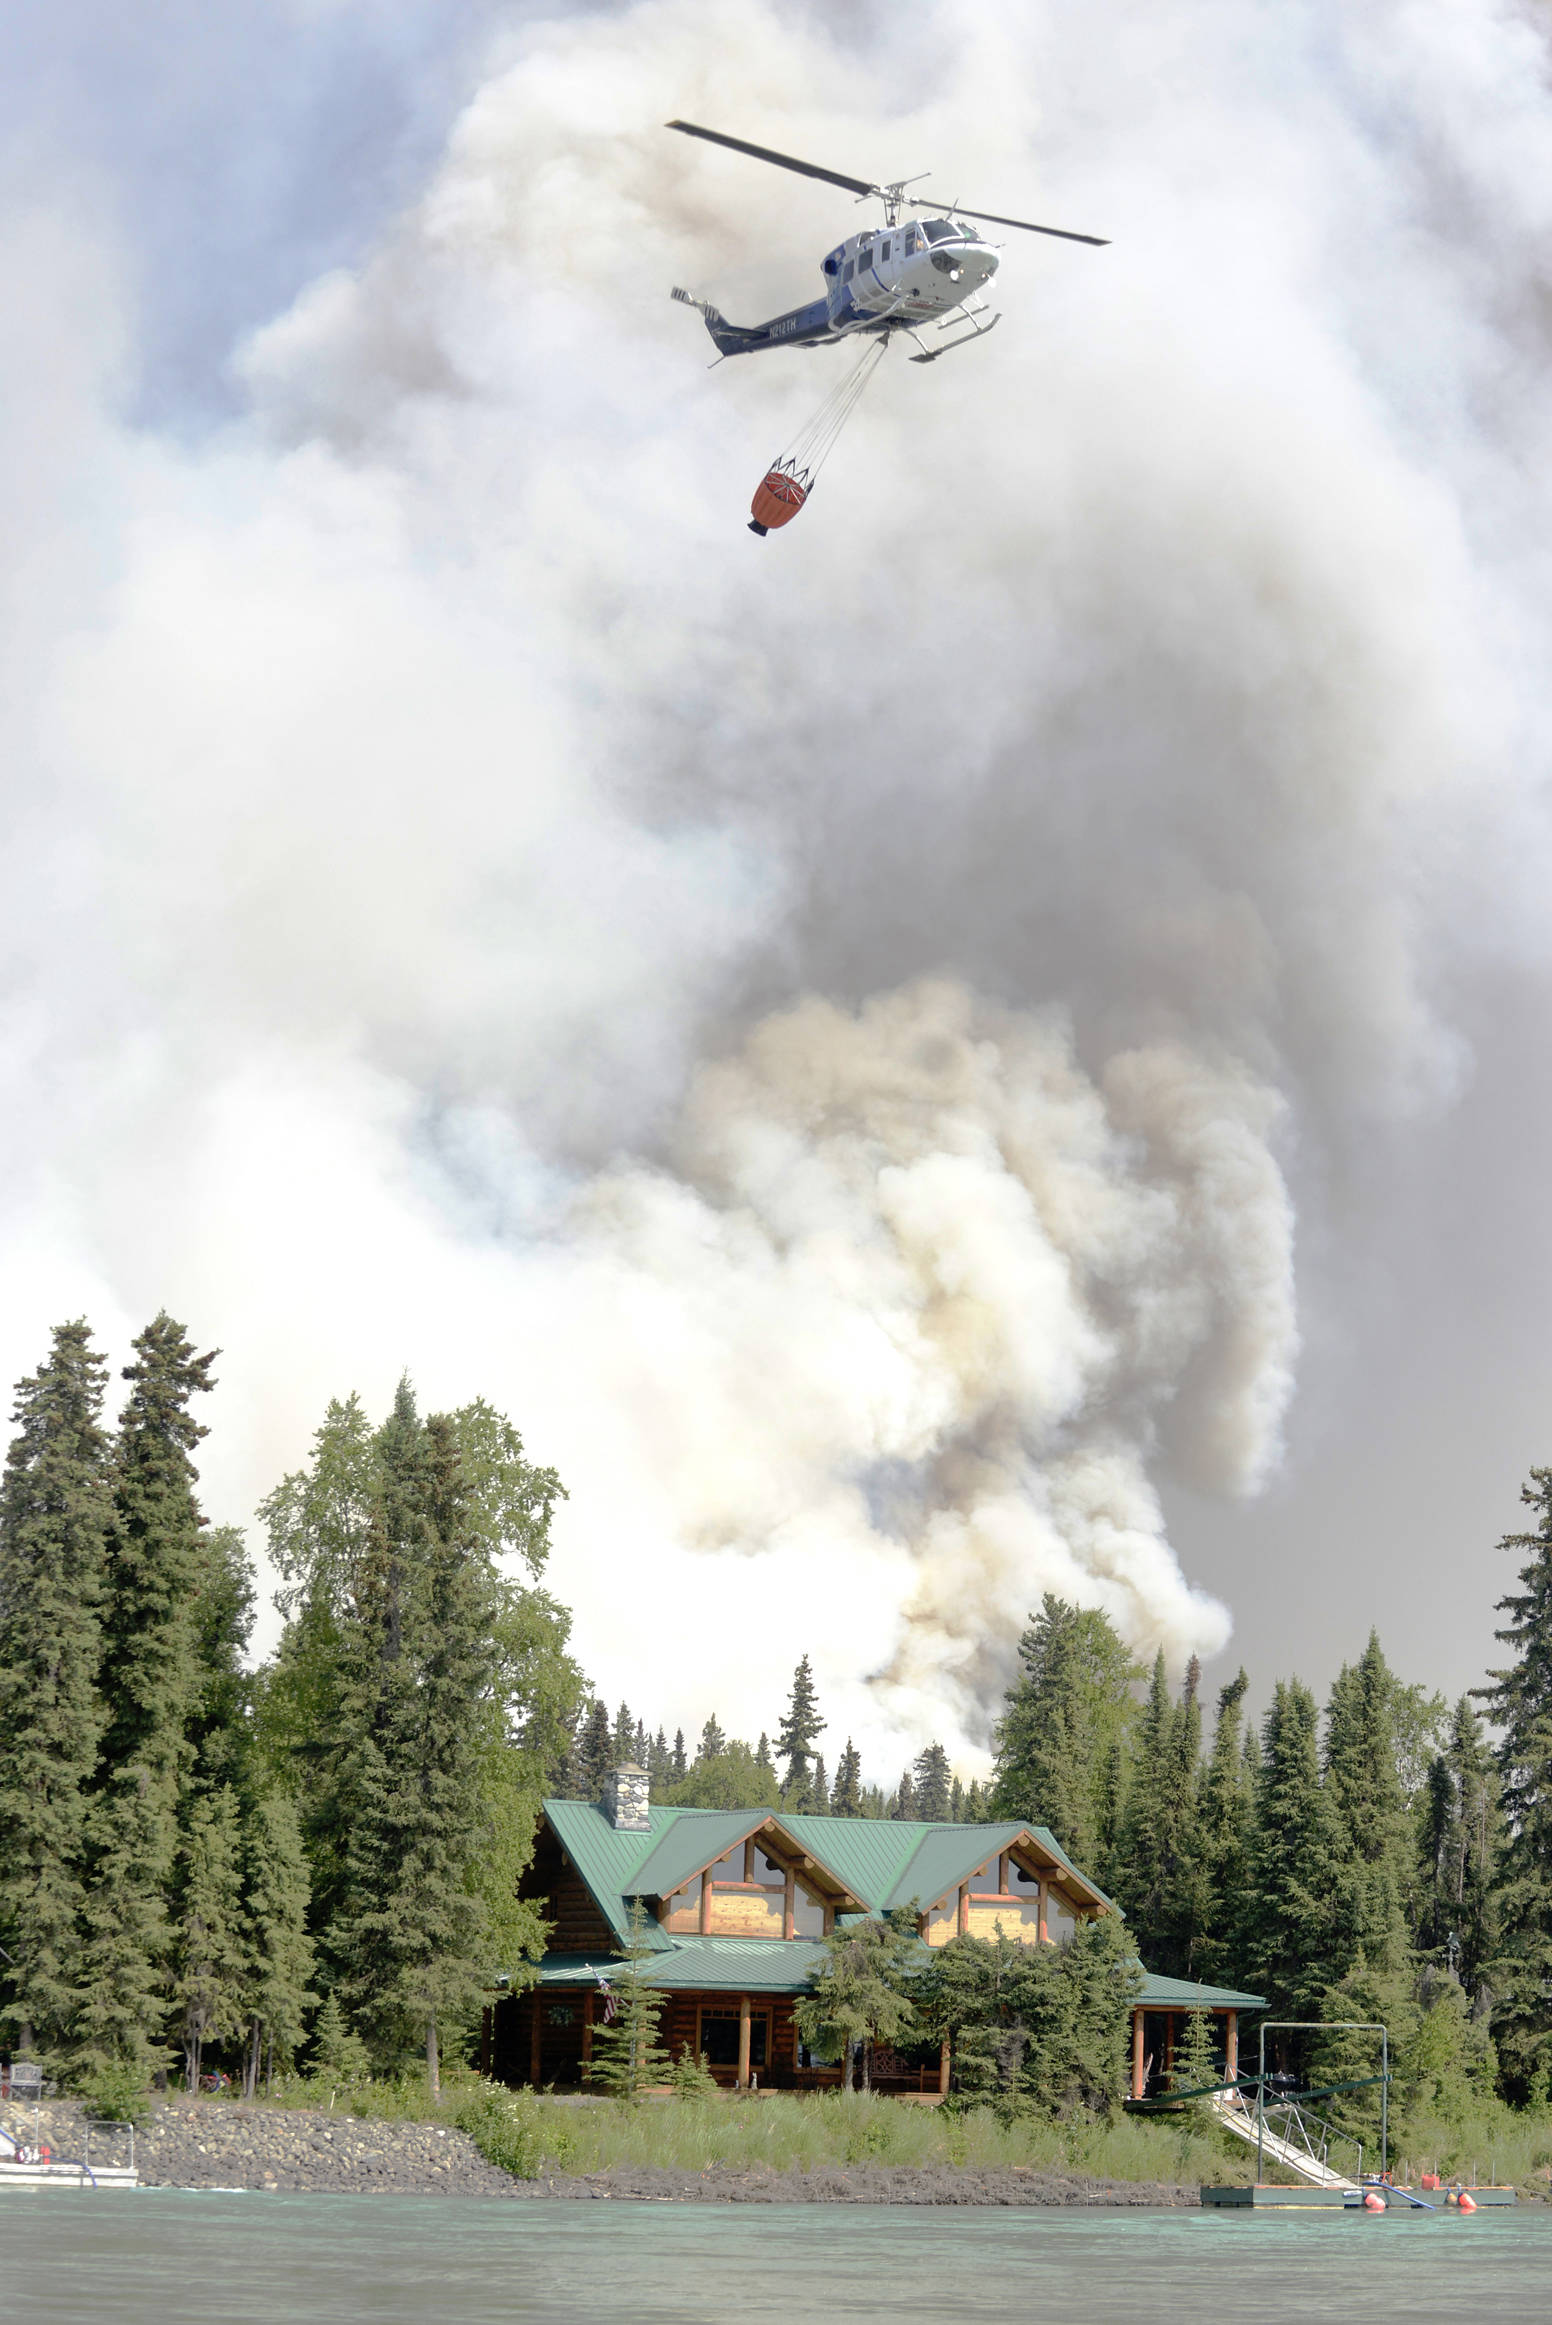 A helicopter returns from a dumping run on the north shore of the Kenai River during the Card Street wildfire in this June 16, 2015 photo. (Ben Boettger/Peninsula Clarion, file)